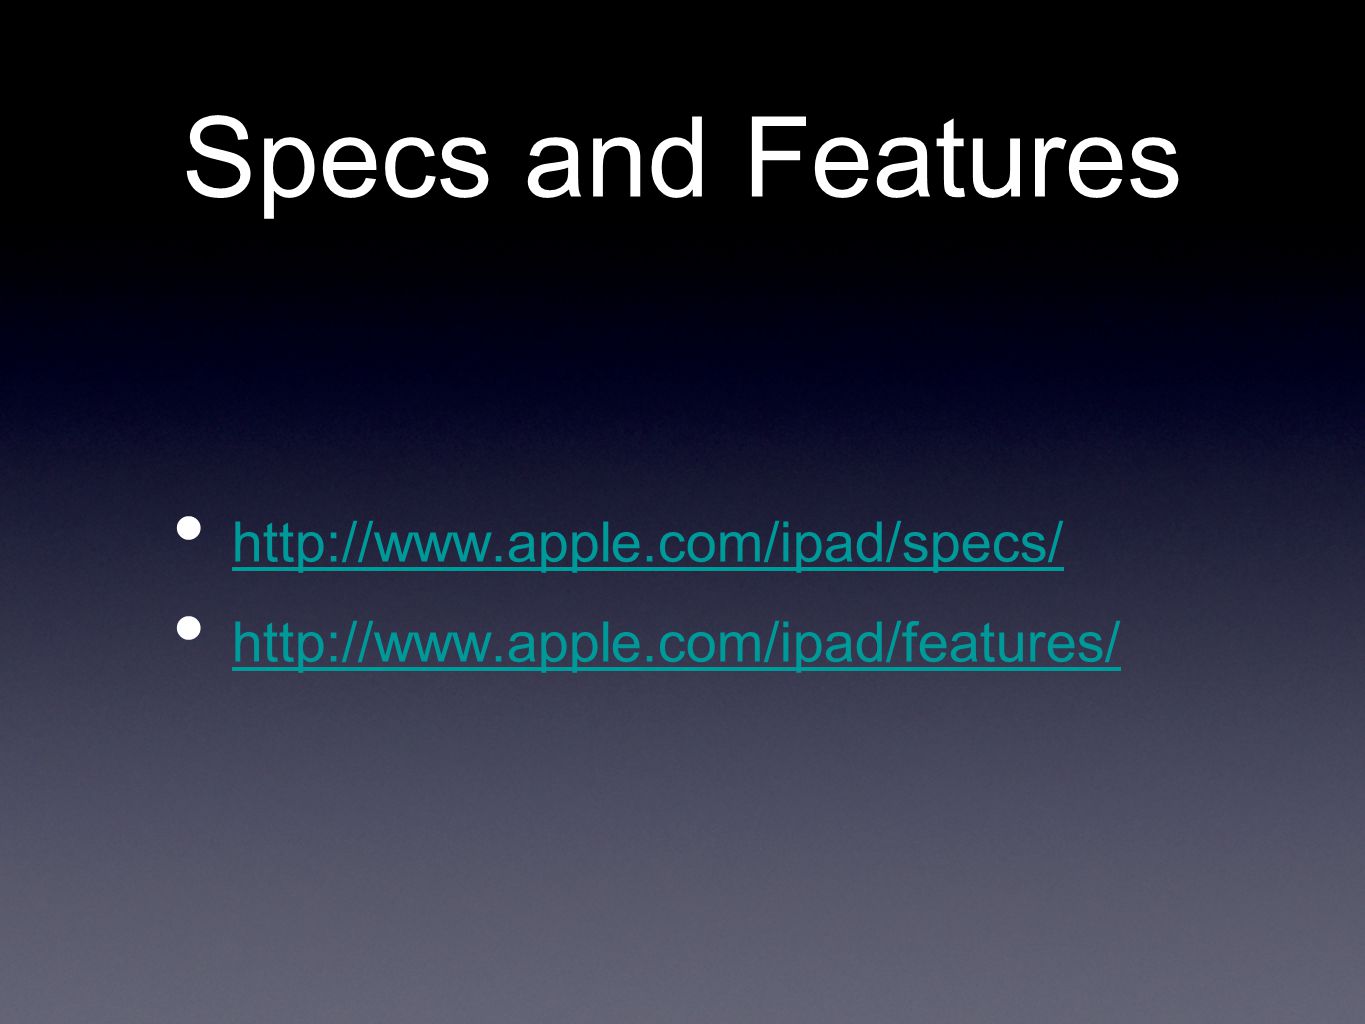 Specs and Features